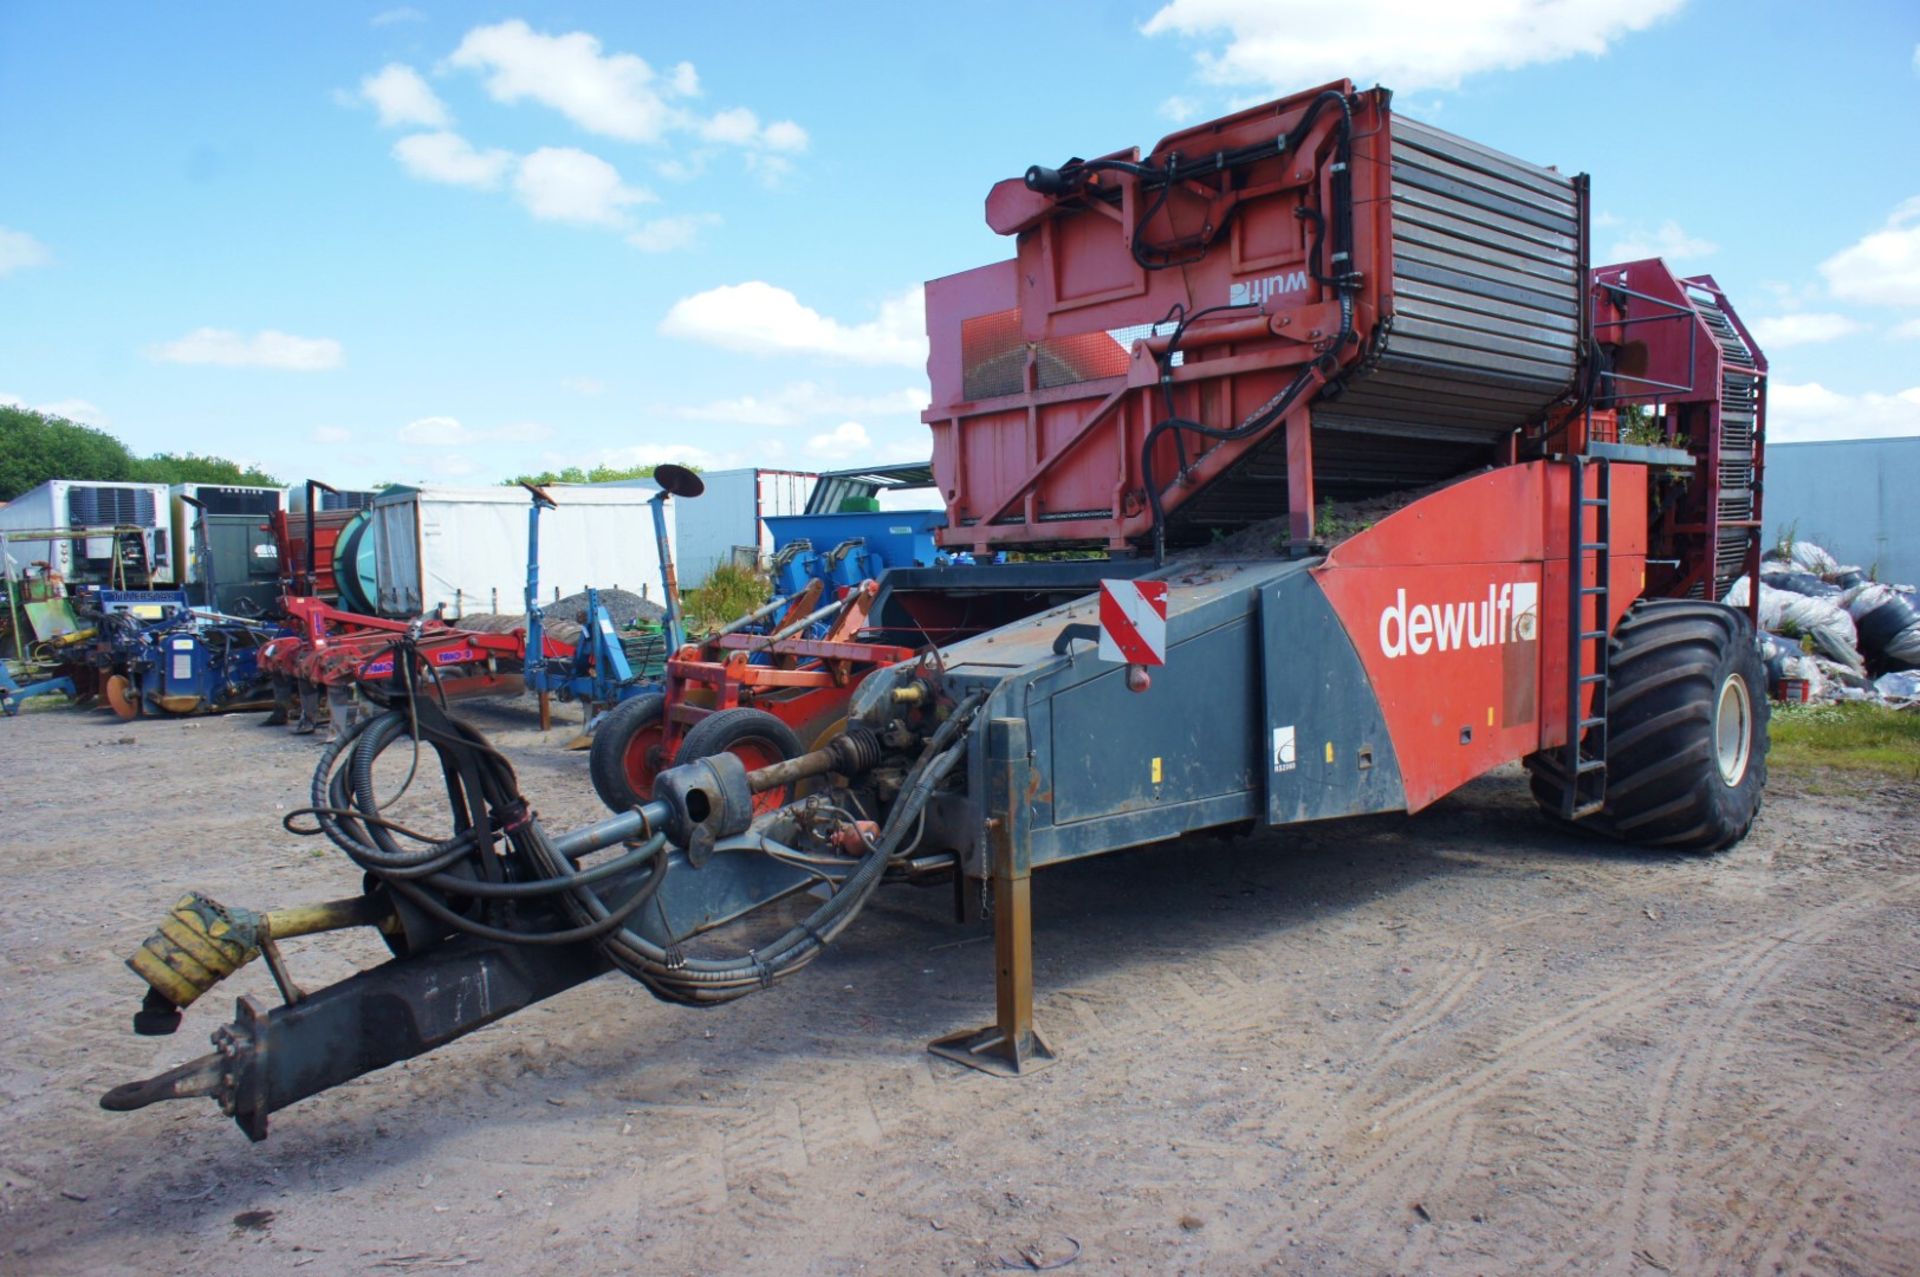 Dewulf RS2060 Trailed 2-Row Sieving Harvester, Serial Number 5811679, Year 2011